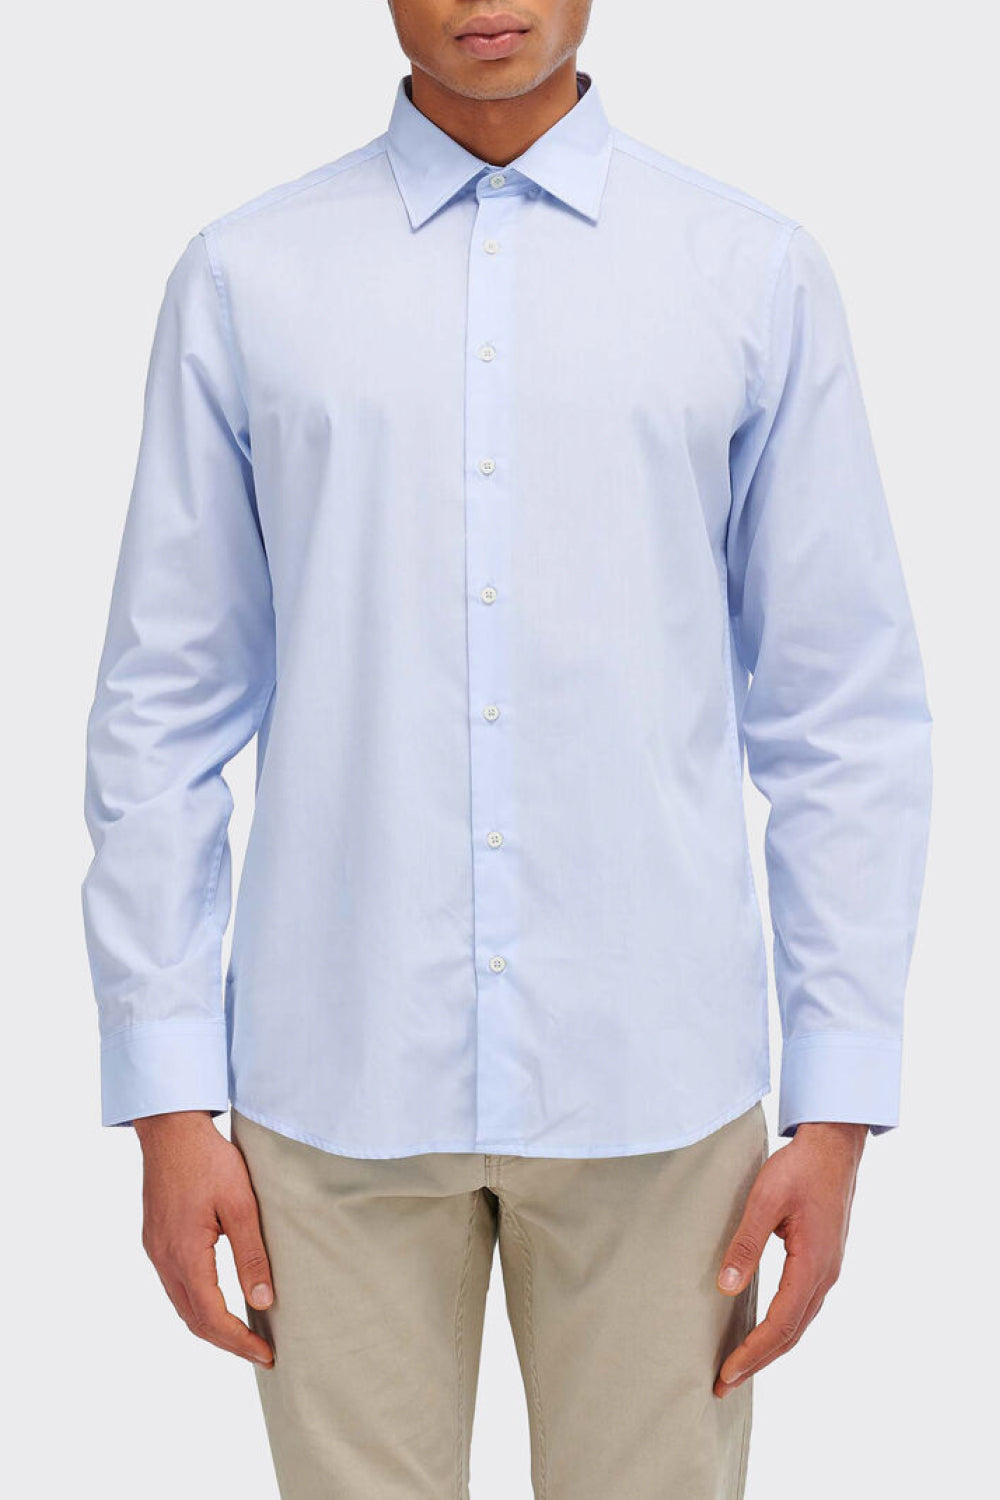 Seriously Casual Blue Full Sleeve Shirt